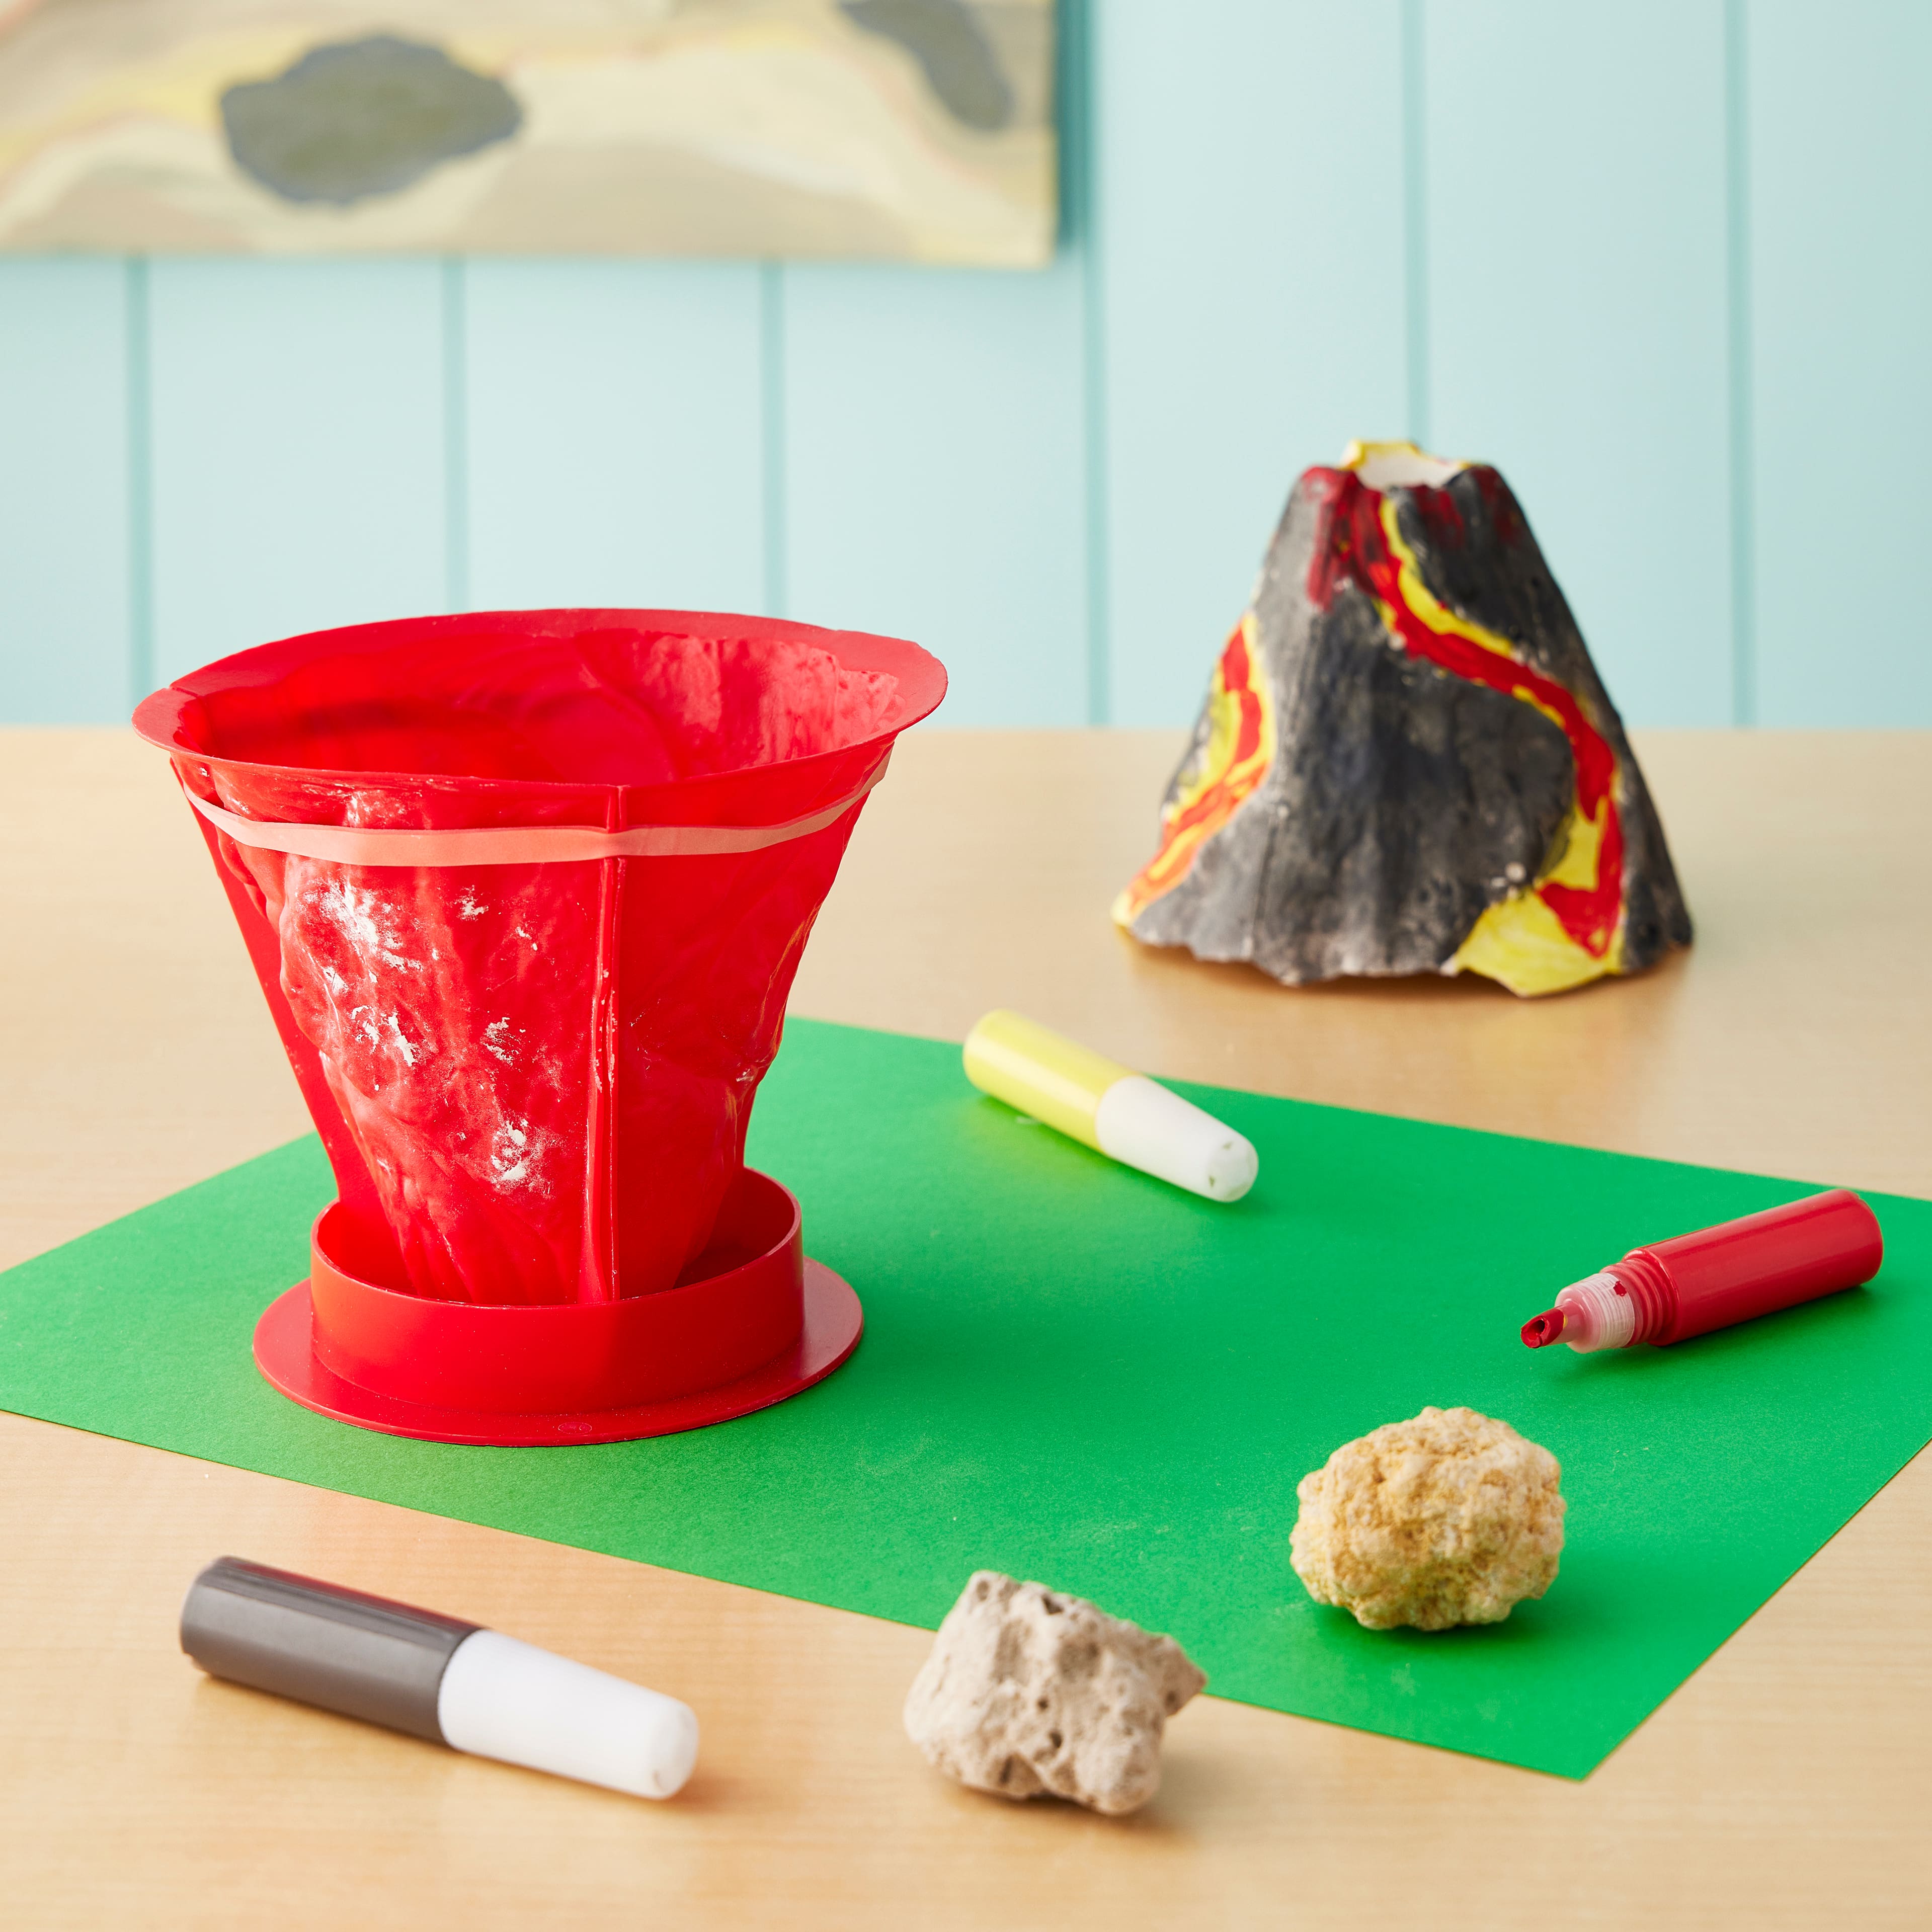 12 Pack: National Geographic&#x2122; Volcano Making Kit